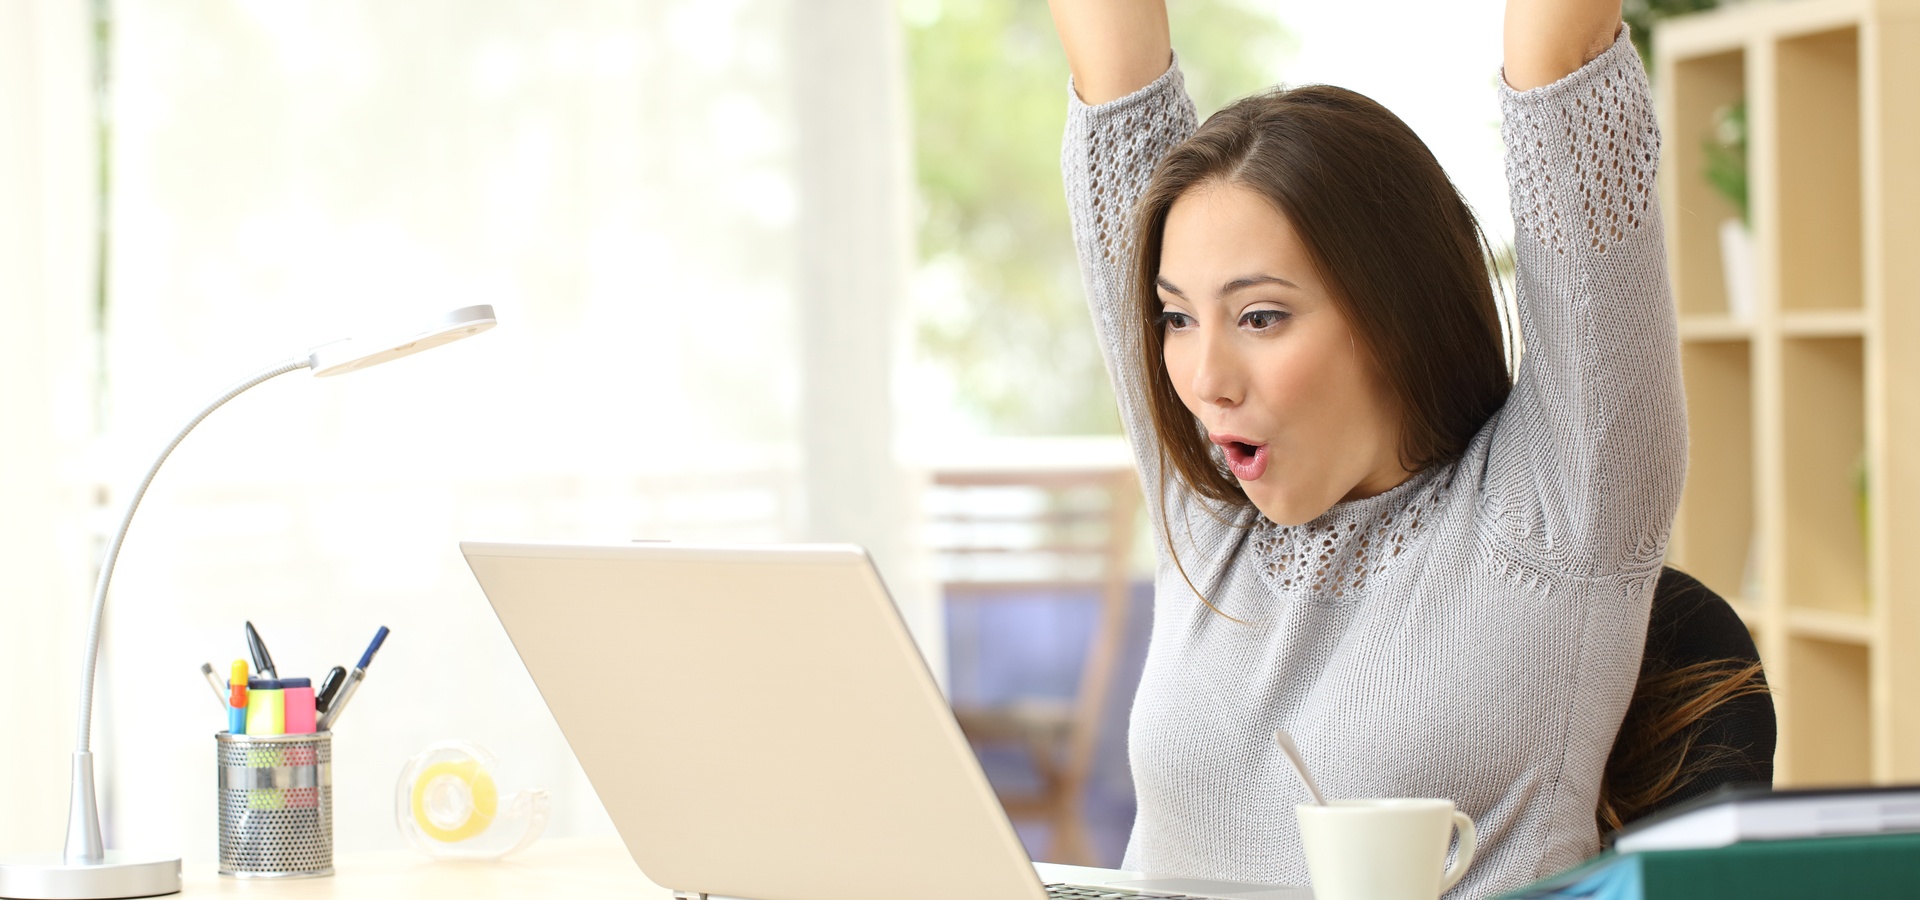 Happy woman raising her arms in front of computer laptop